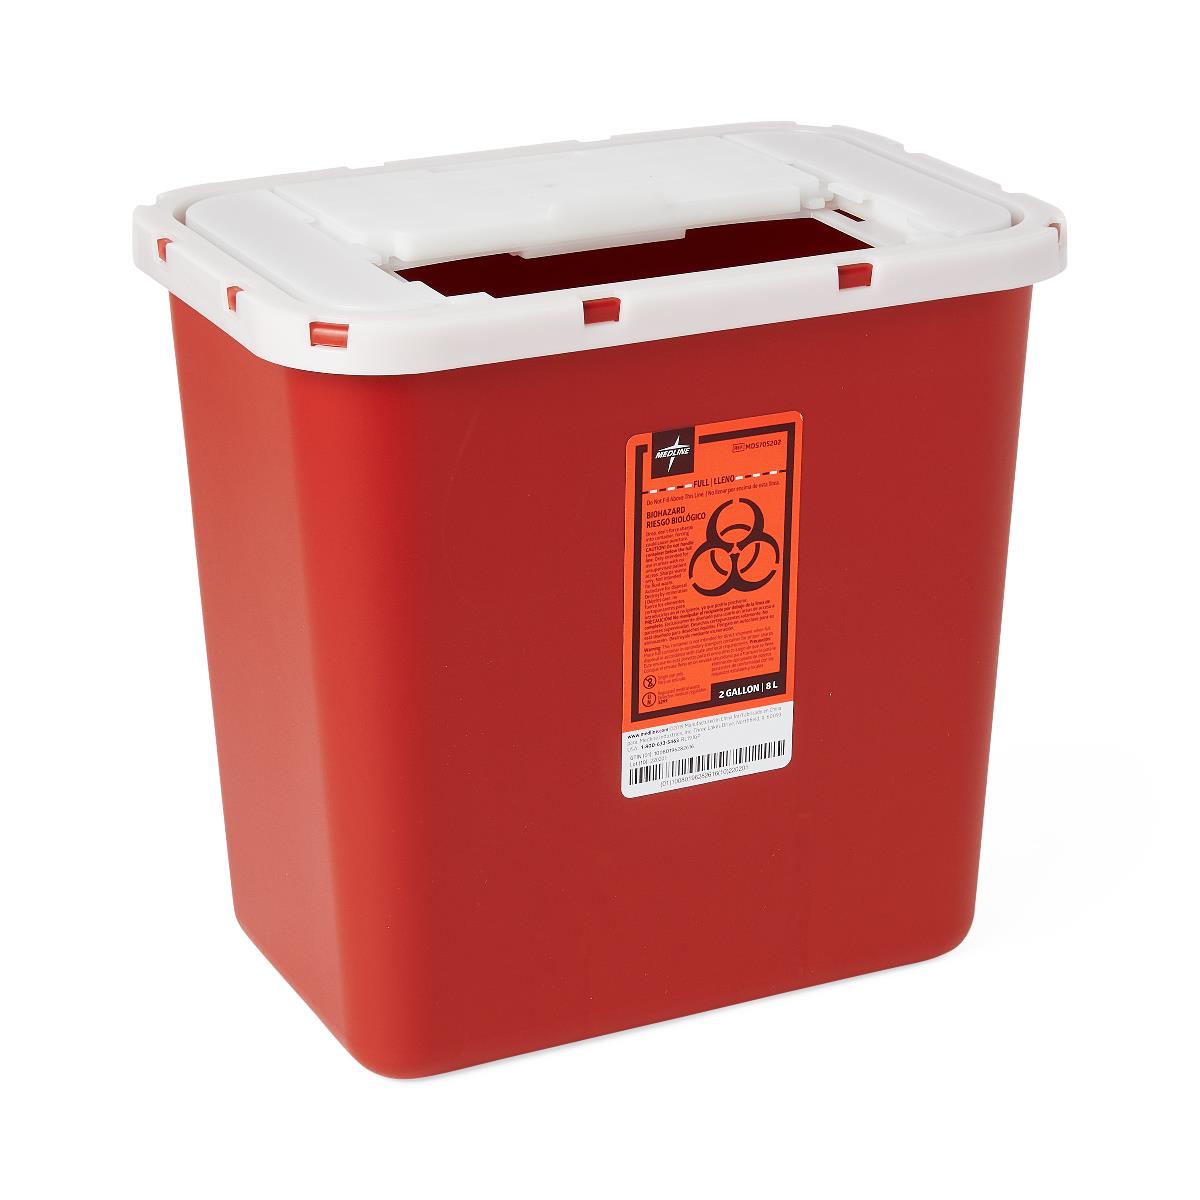 Multipurpose Sharps Containers